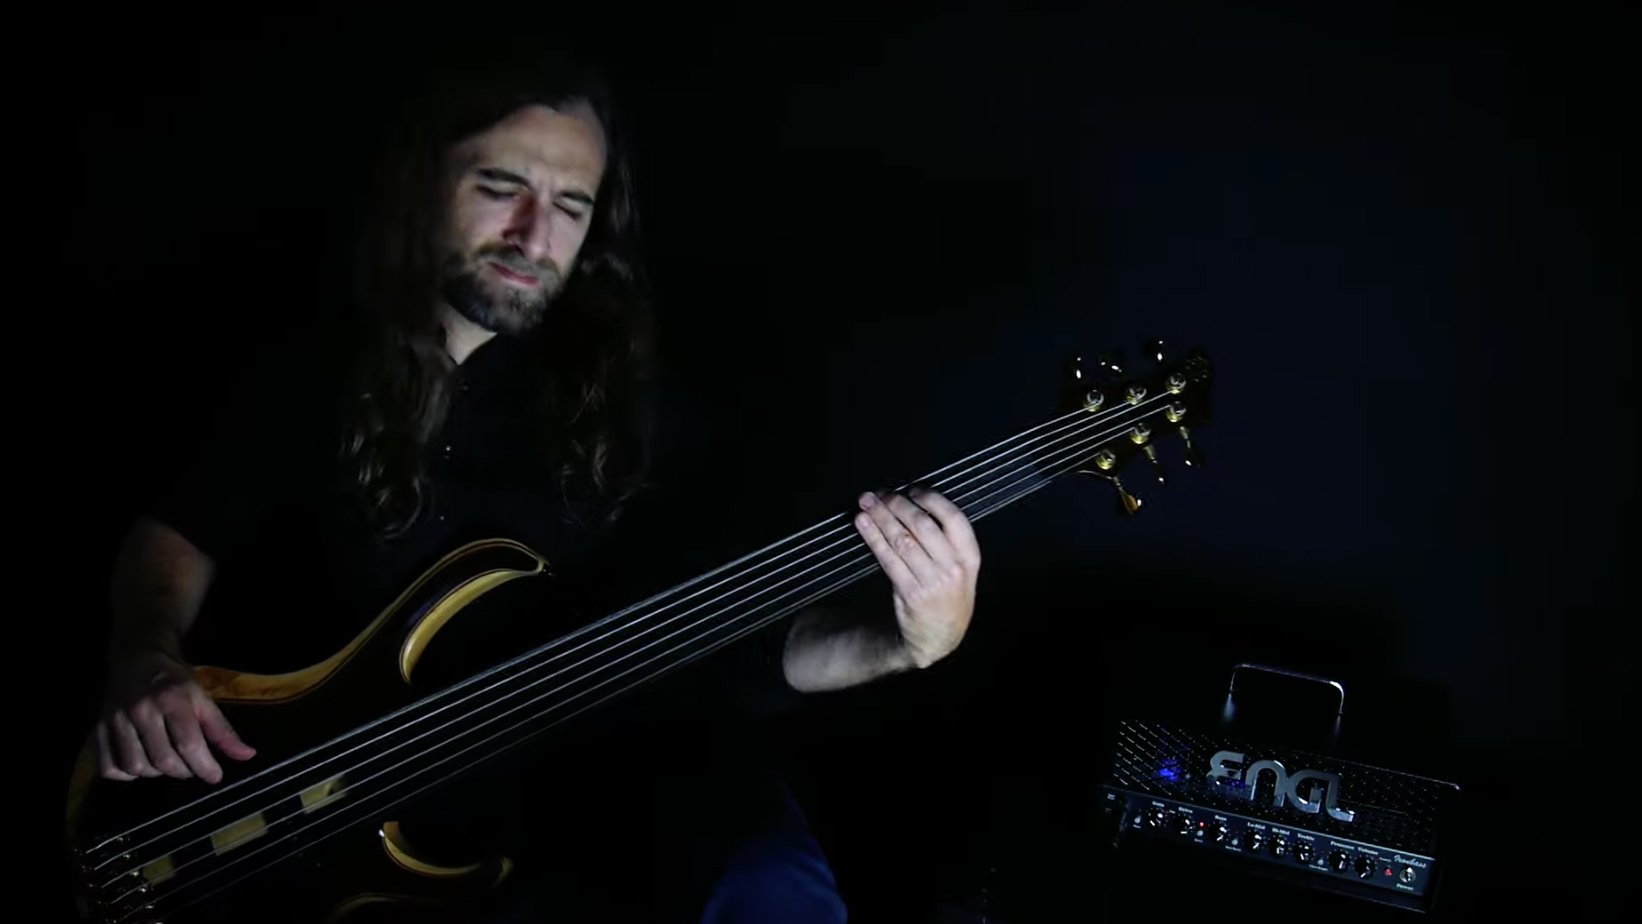 Read more about the article Linus Klausenitzer, The Bass Player Of OBSIDIOUS, Has Released A Bass Video-Playthrough For The Single “Iconic”.